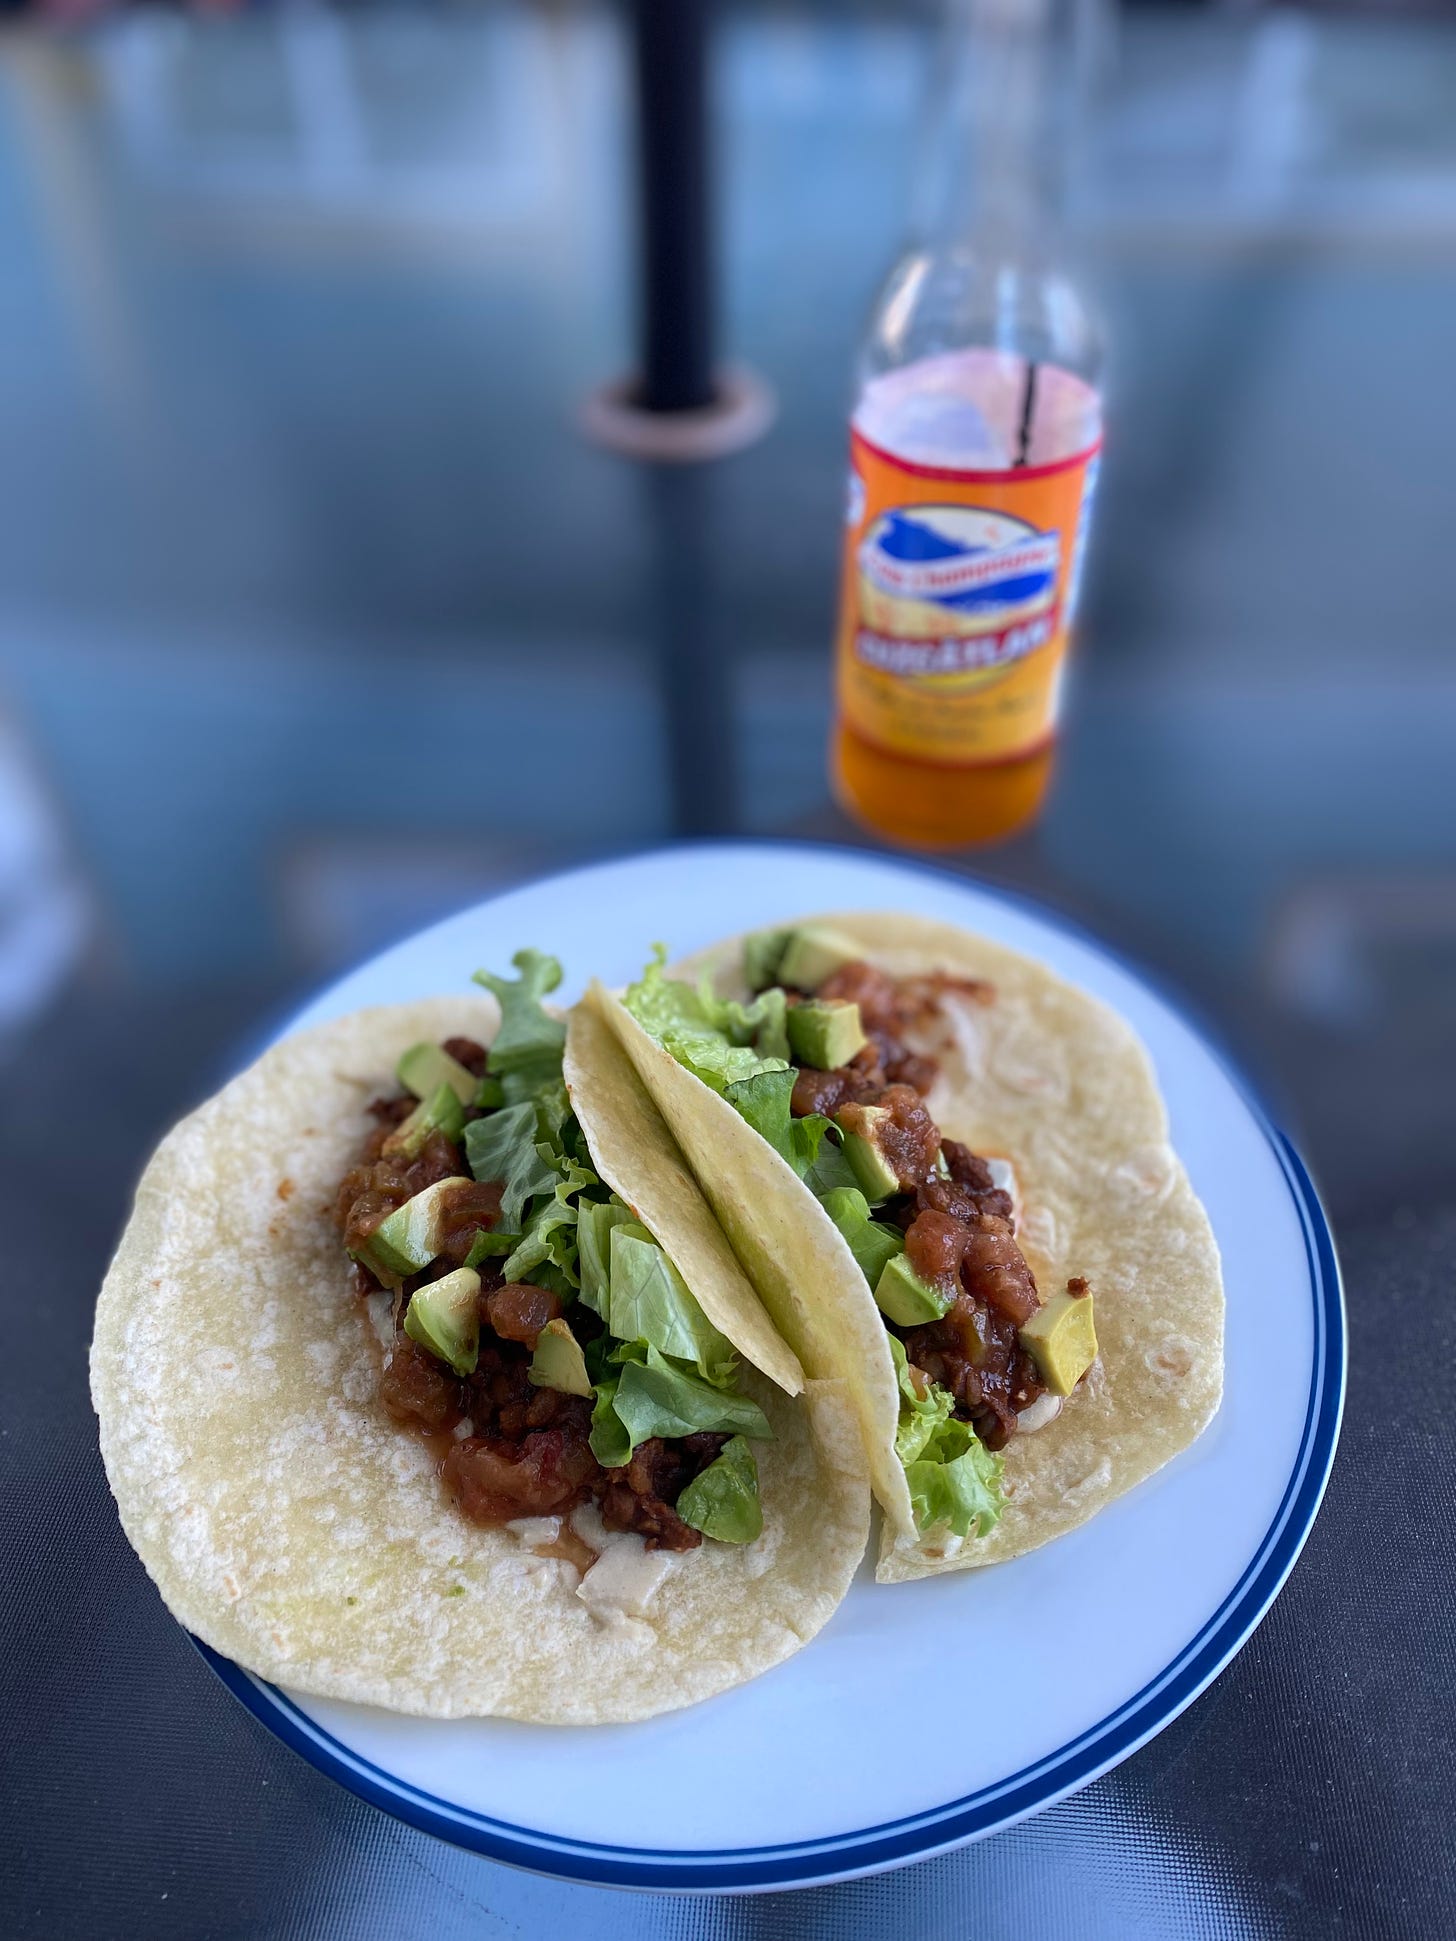 Two tacos in soft shells, each with lentils, salsa, avocado, and lettuce visible. A bottle of Mexican soda sits in the background.